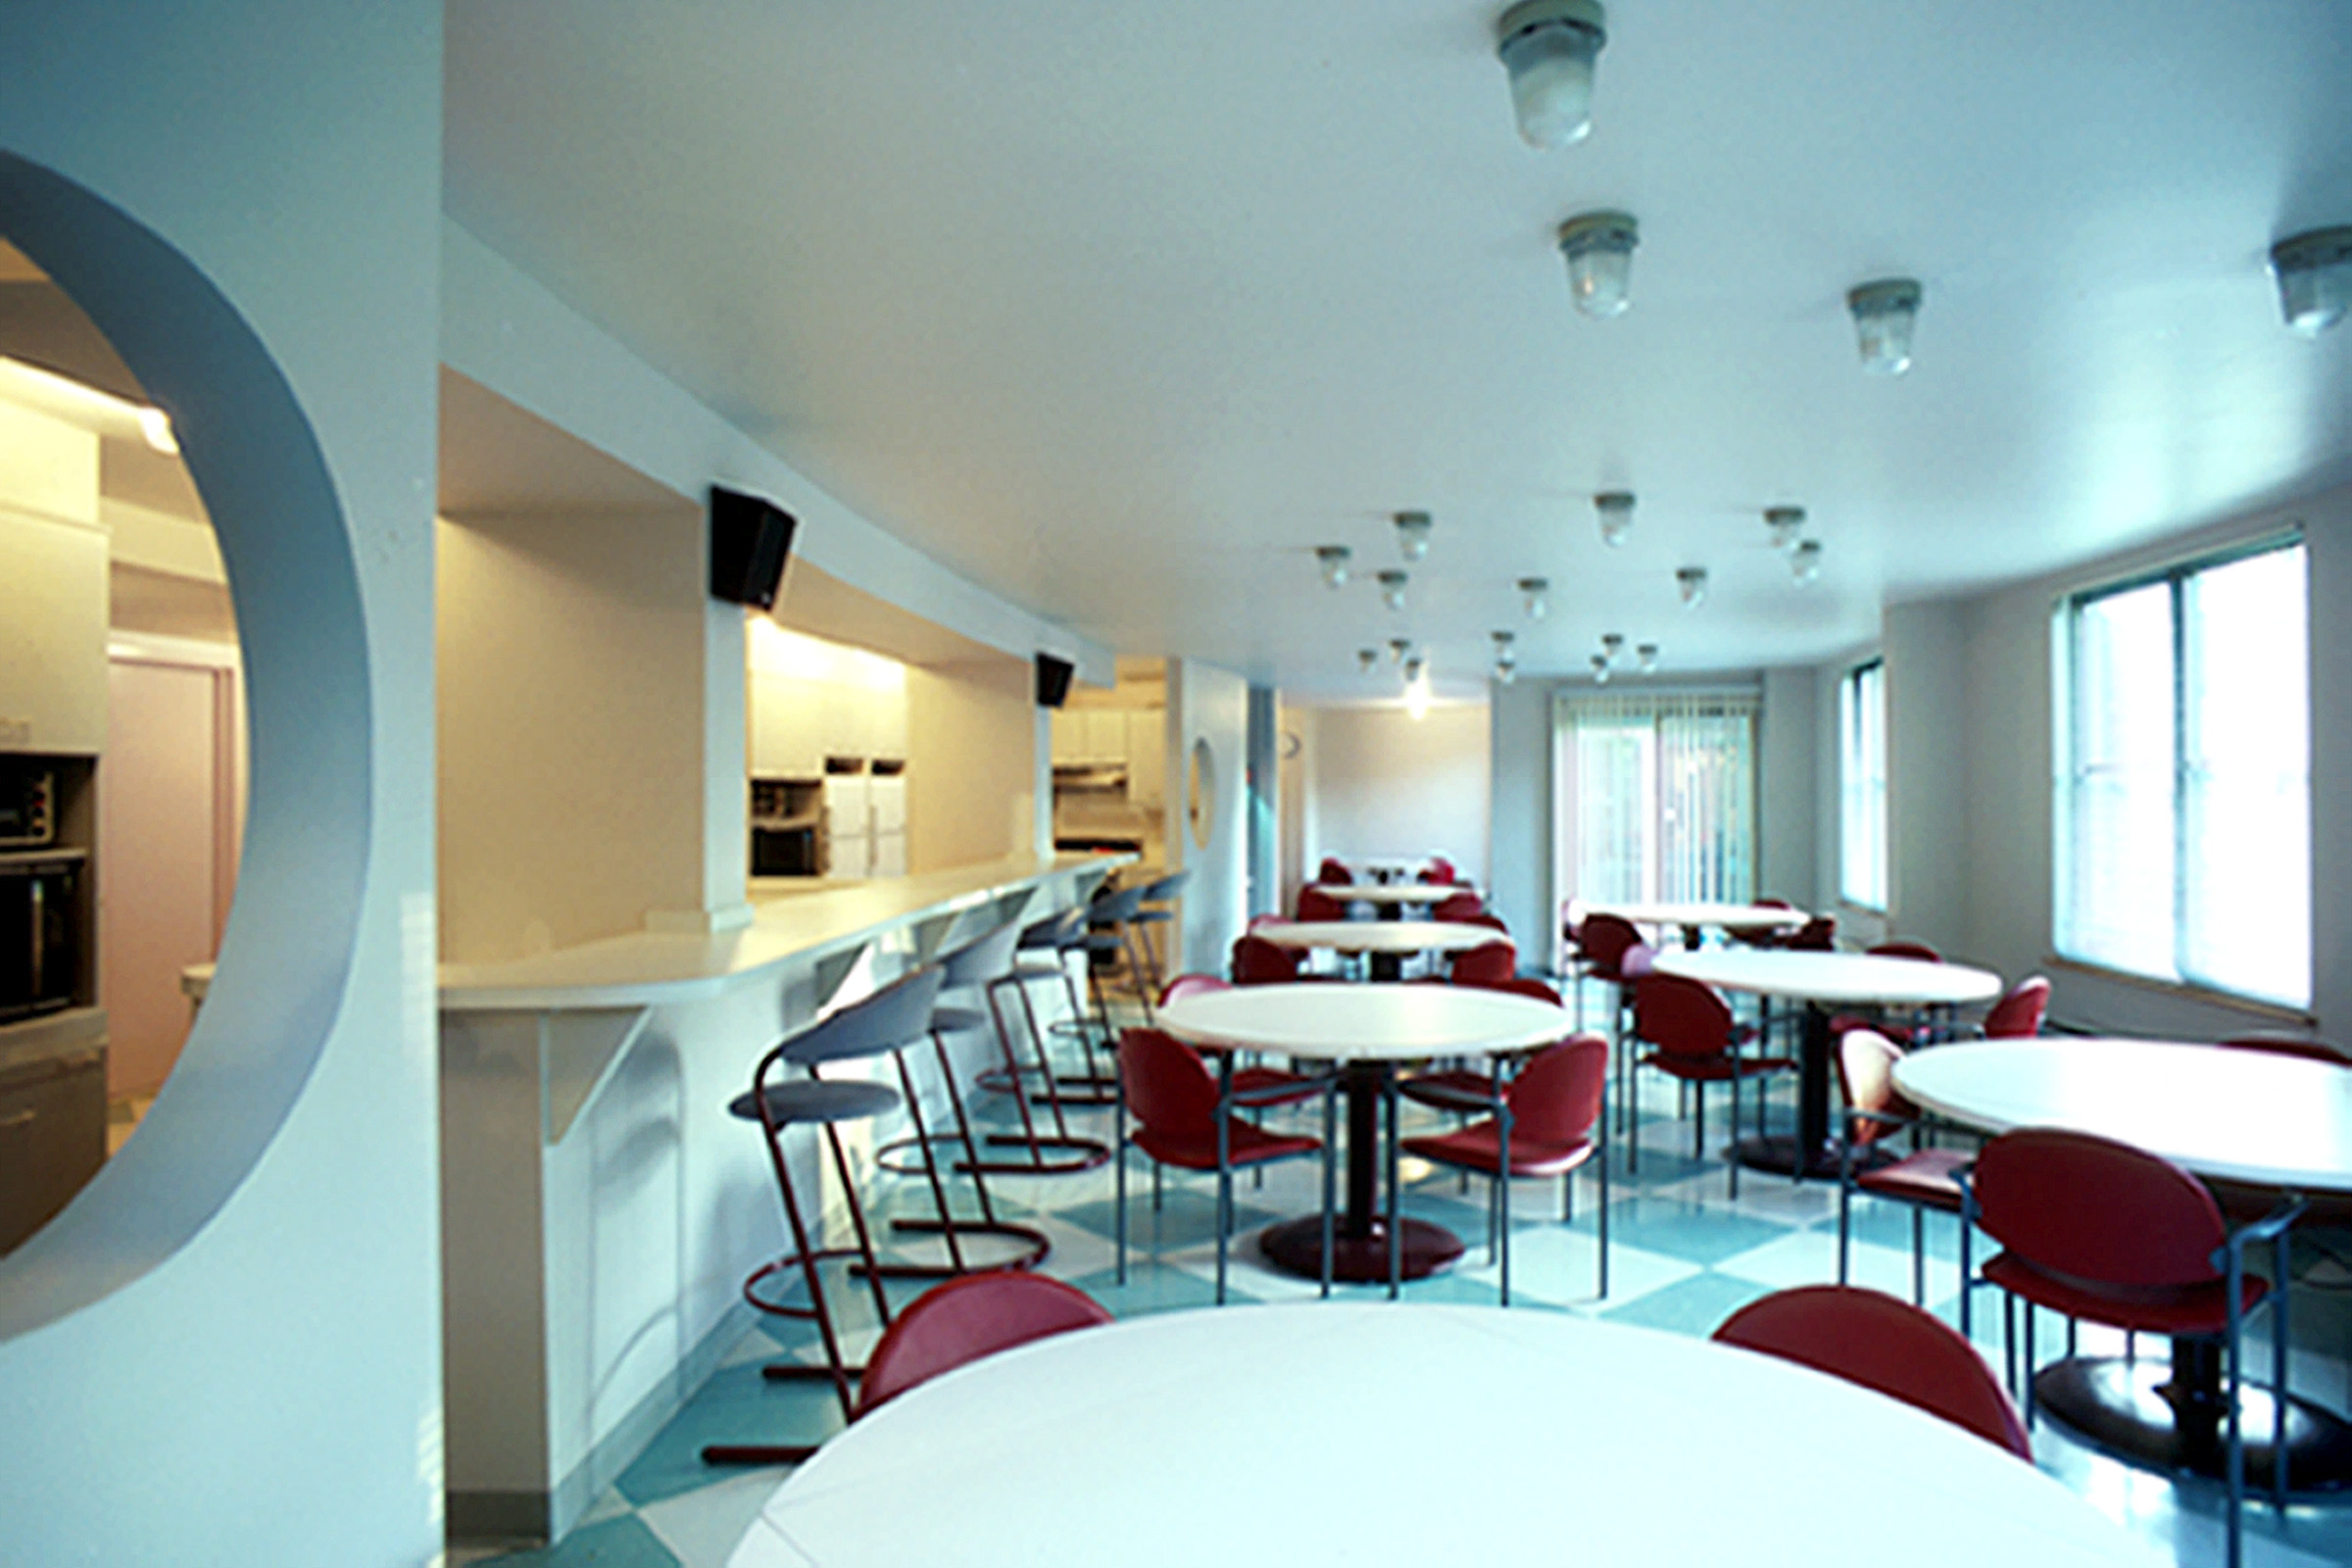 Interior View 7 - Eating Area.jpg